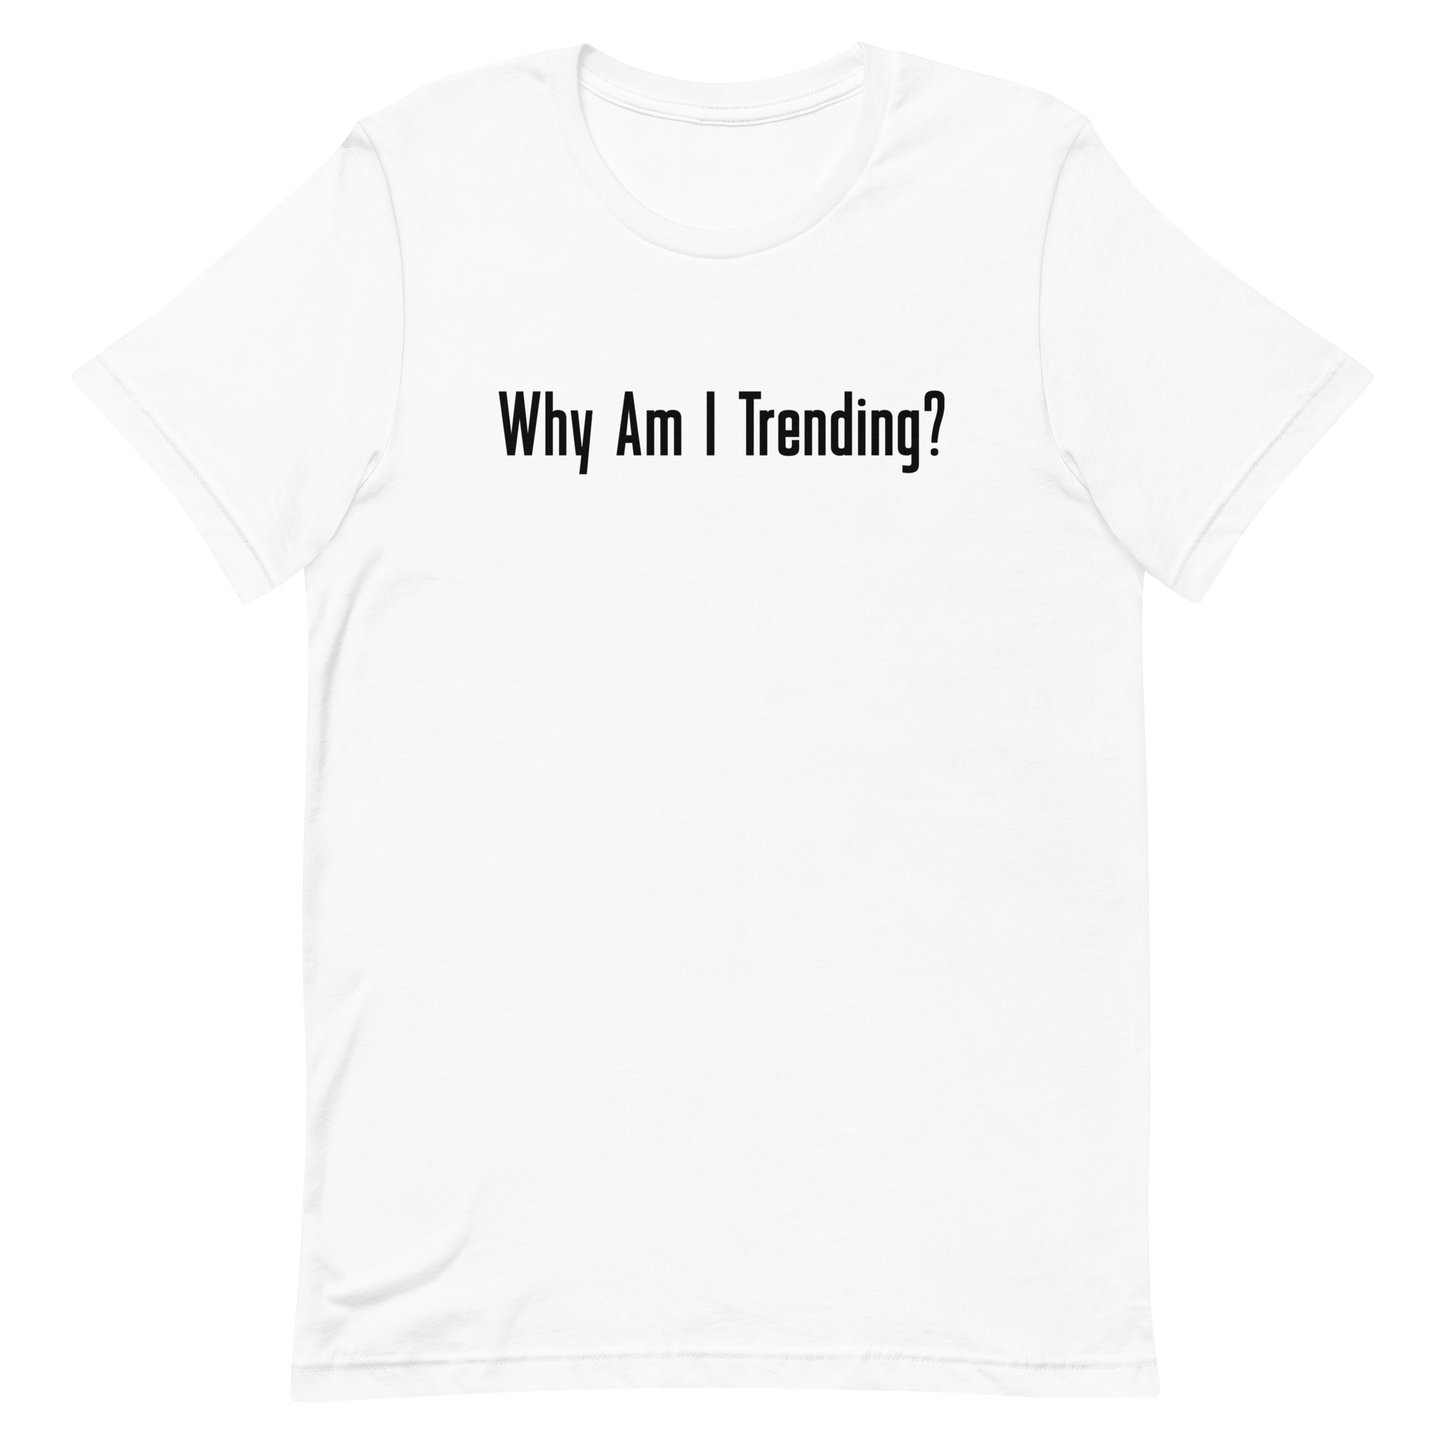 WHY AM I TRENDING? Tee